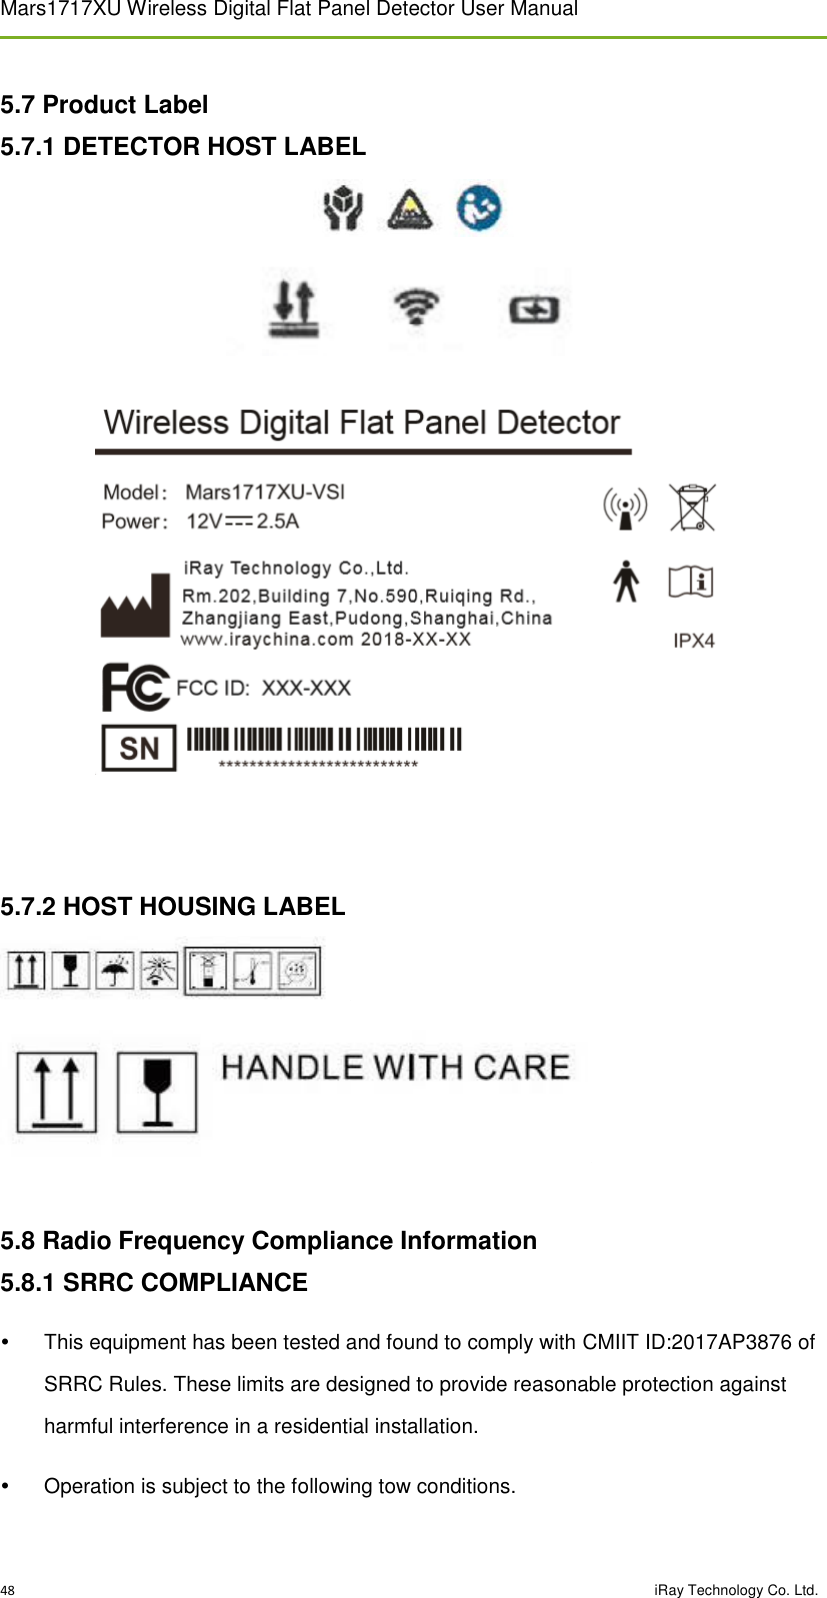 Mars1717XU Wireless Digital Flat Panel Detector User Manual 48                                                                                                                                                                                                  iRay Technology Co. Ltd. 5.7 Product Label 5.7.1 DETECTOR HOST LABEL      5.7.2 HOST HOUSING LABEL    5.8 Radio Frequency Compliance Information 5.8.1 SRRC COMPLIANCE   This equipment has been tested and found to comply with CMIIT ID:2017AP3876 of SRRC Rules. These limits are designed to provide reasonable protection against harmful interference in a residential installation.   Operation is subject to the following tow conditions. 